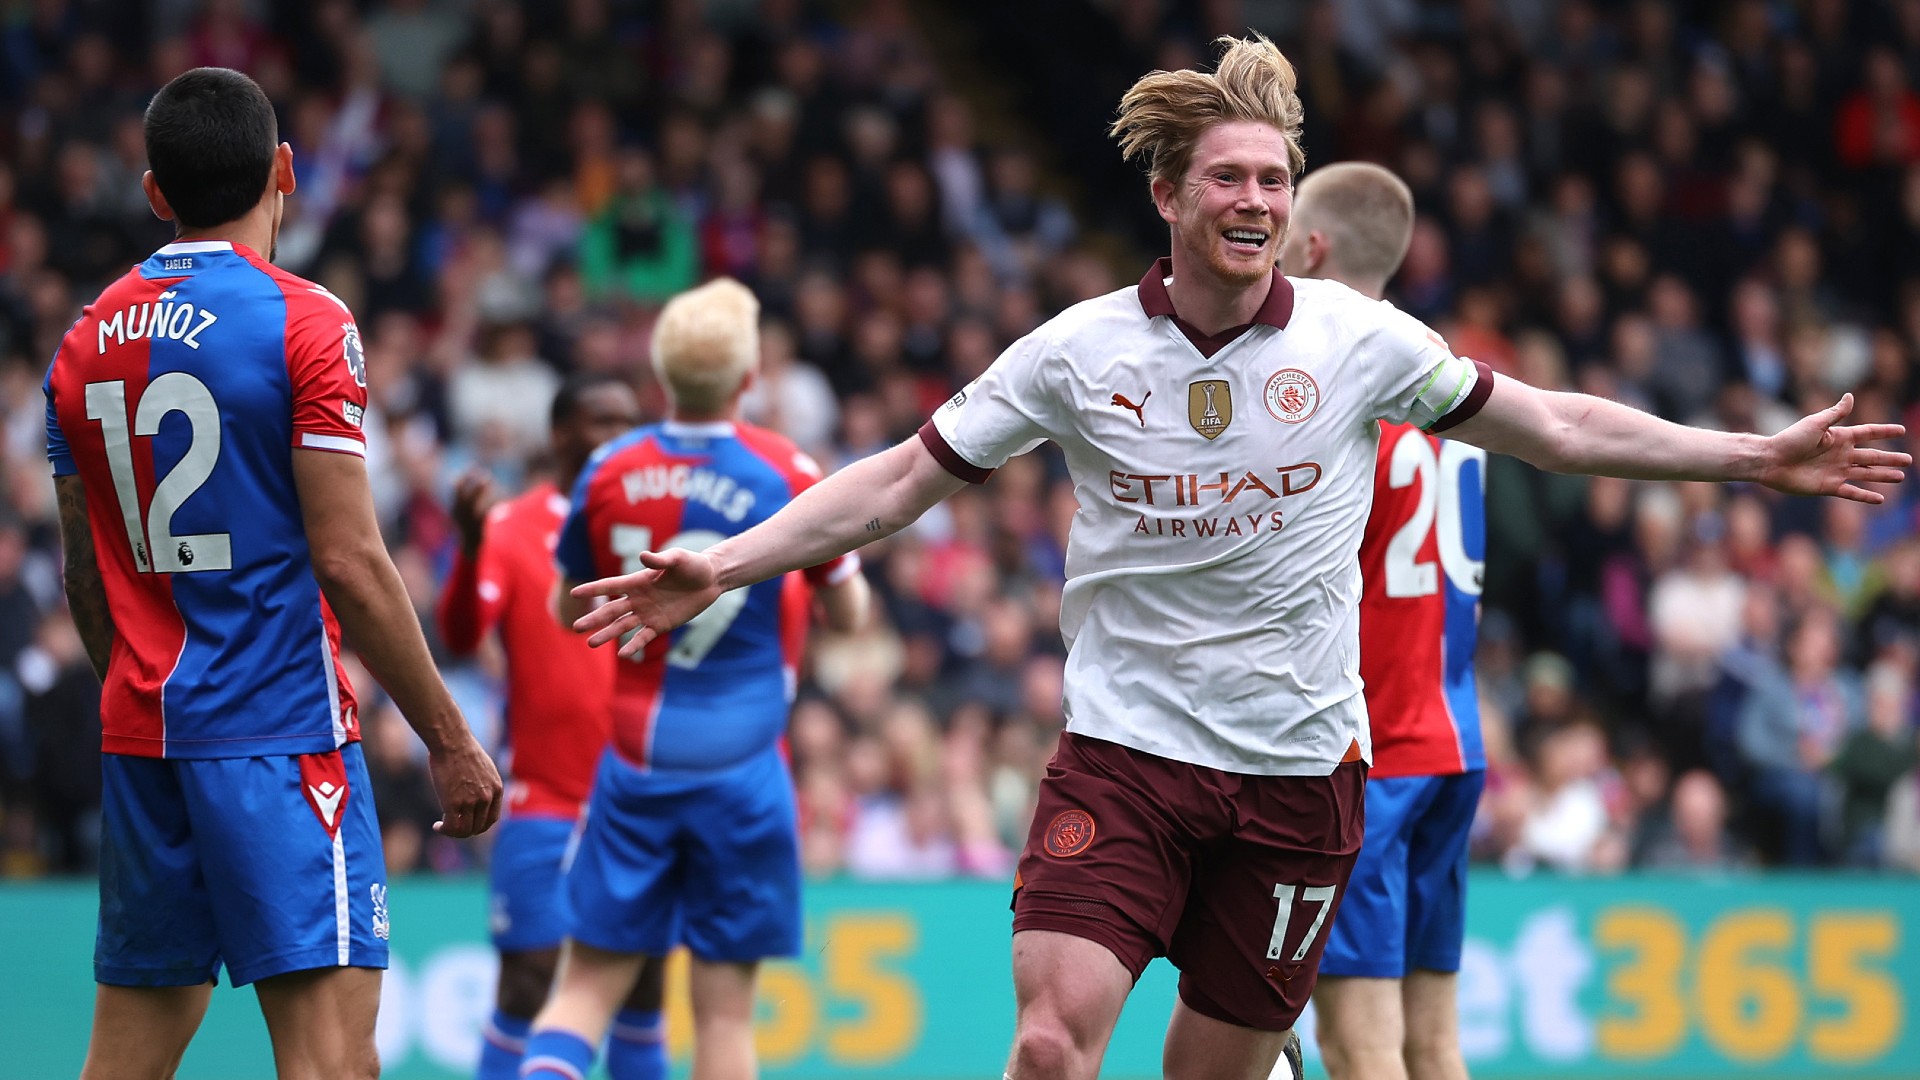 Kevin De Bruyne reveals Manchester City teammate who 'keeps me on my toes'